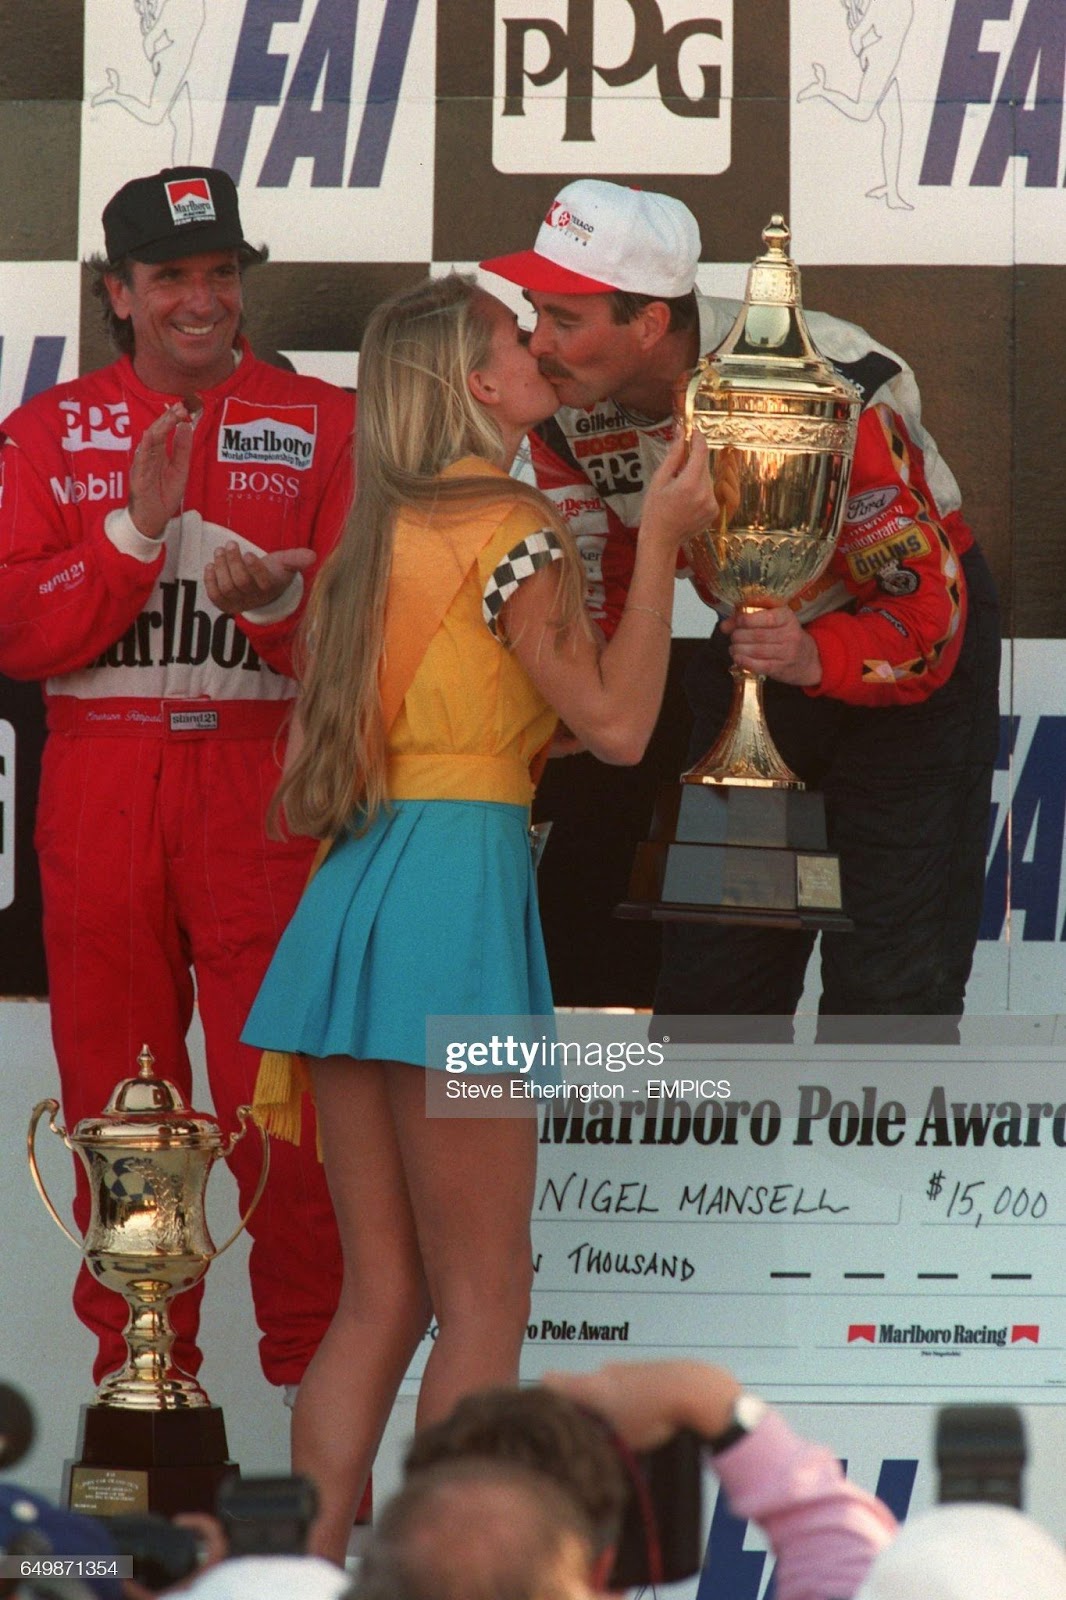 Nigel Mansell receives the winner trophy from Miss Indy car at the 1993 Indy car Australian Grand Prix.